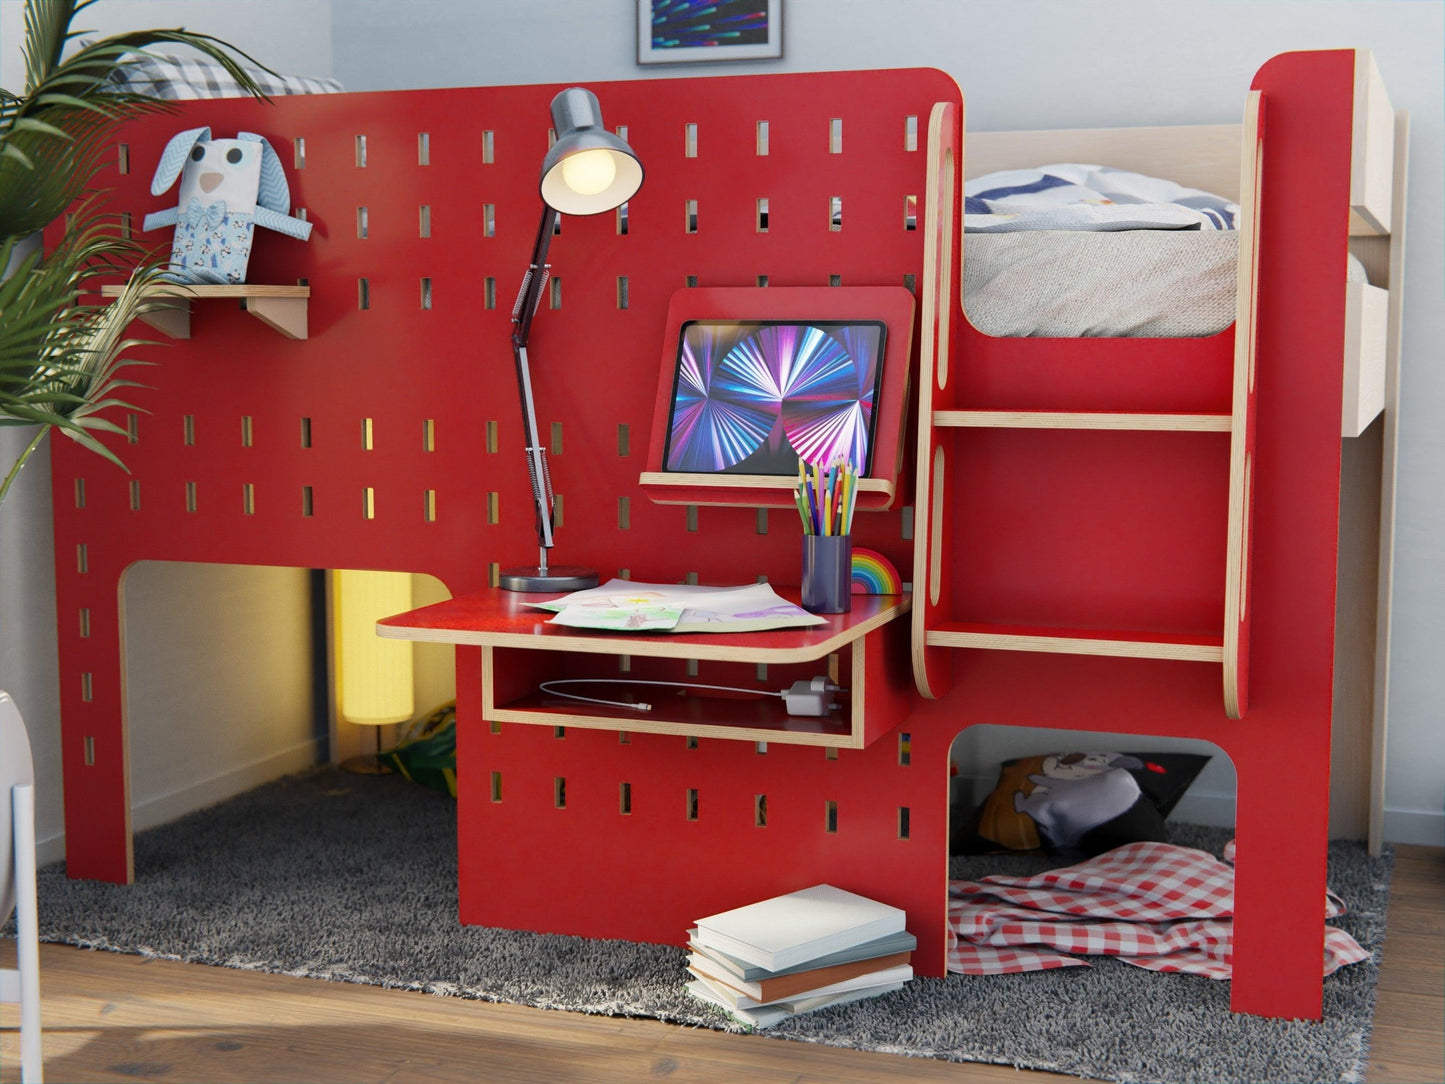 Transform bedtime into an adventure and homework into a joy with our multipurpose wooden low loft bed and study desk combination.